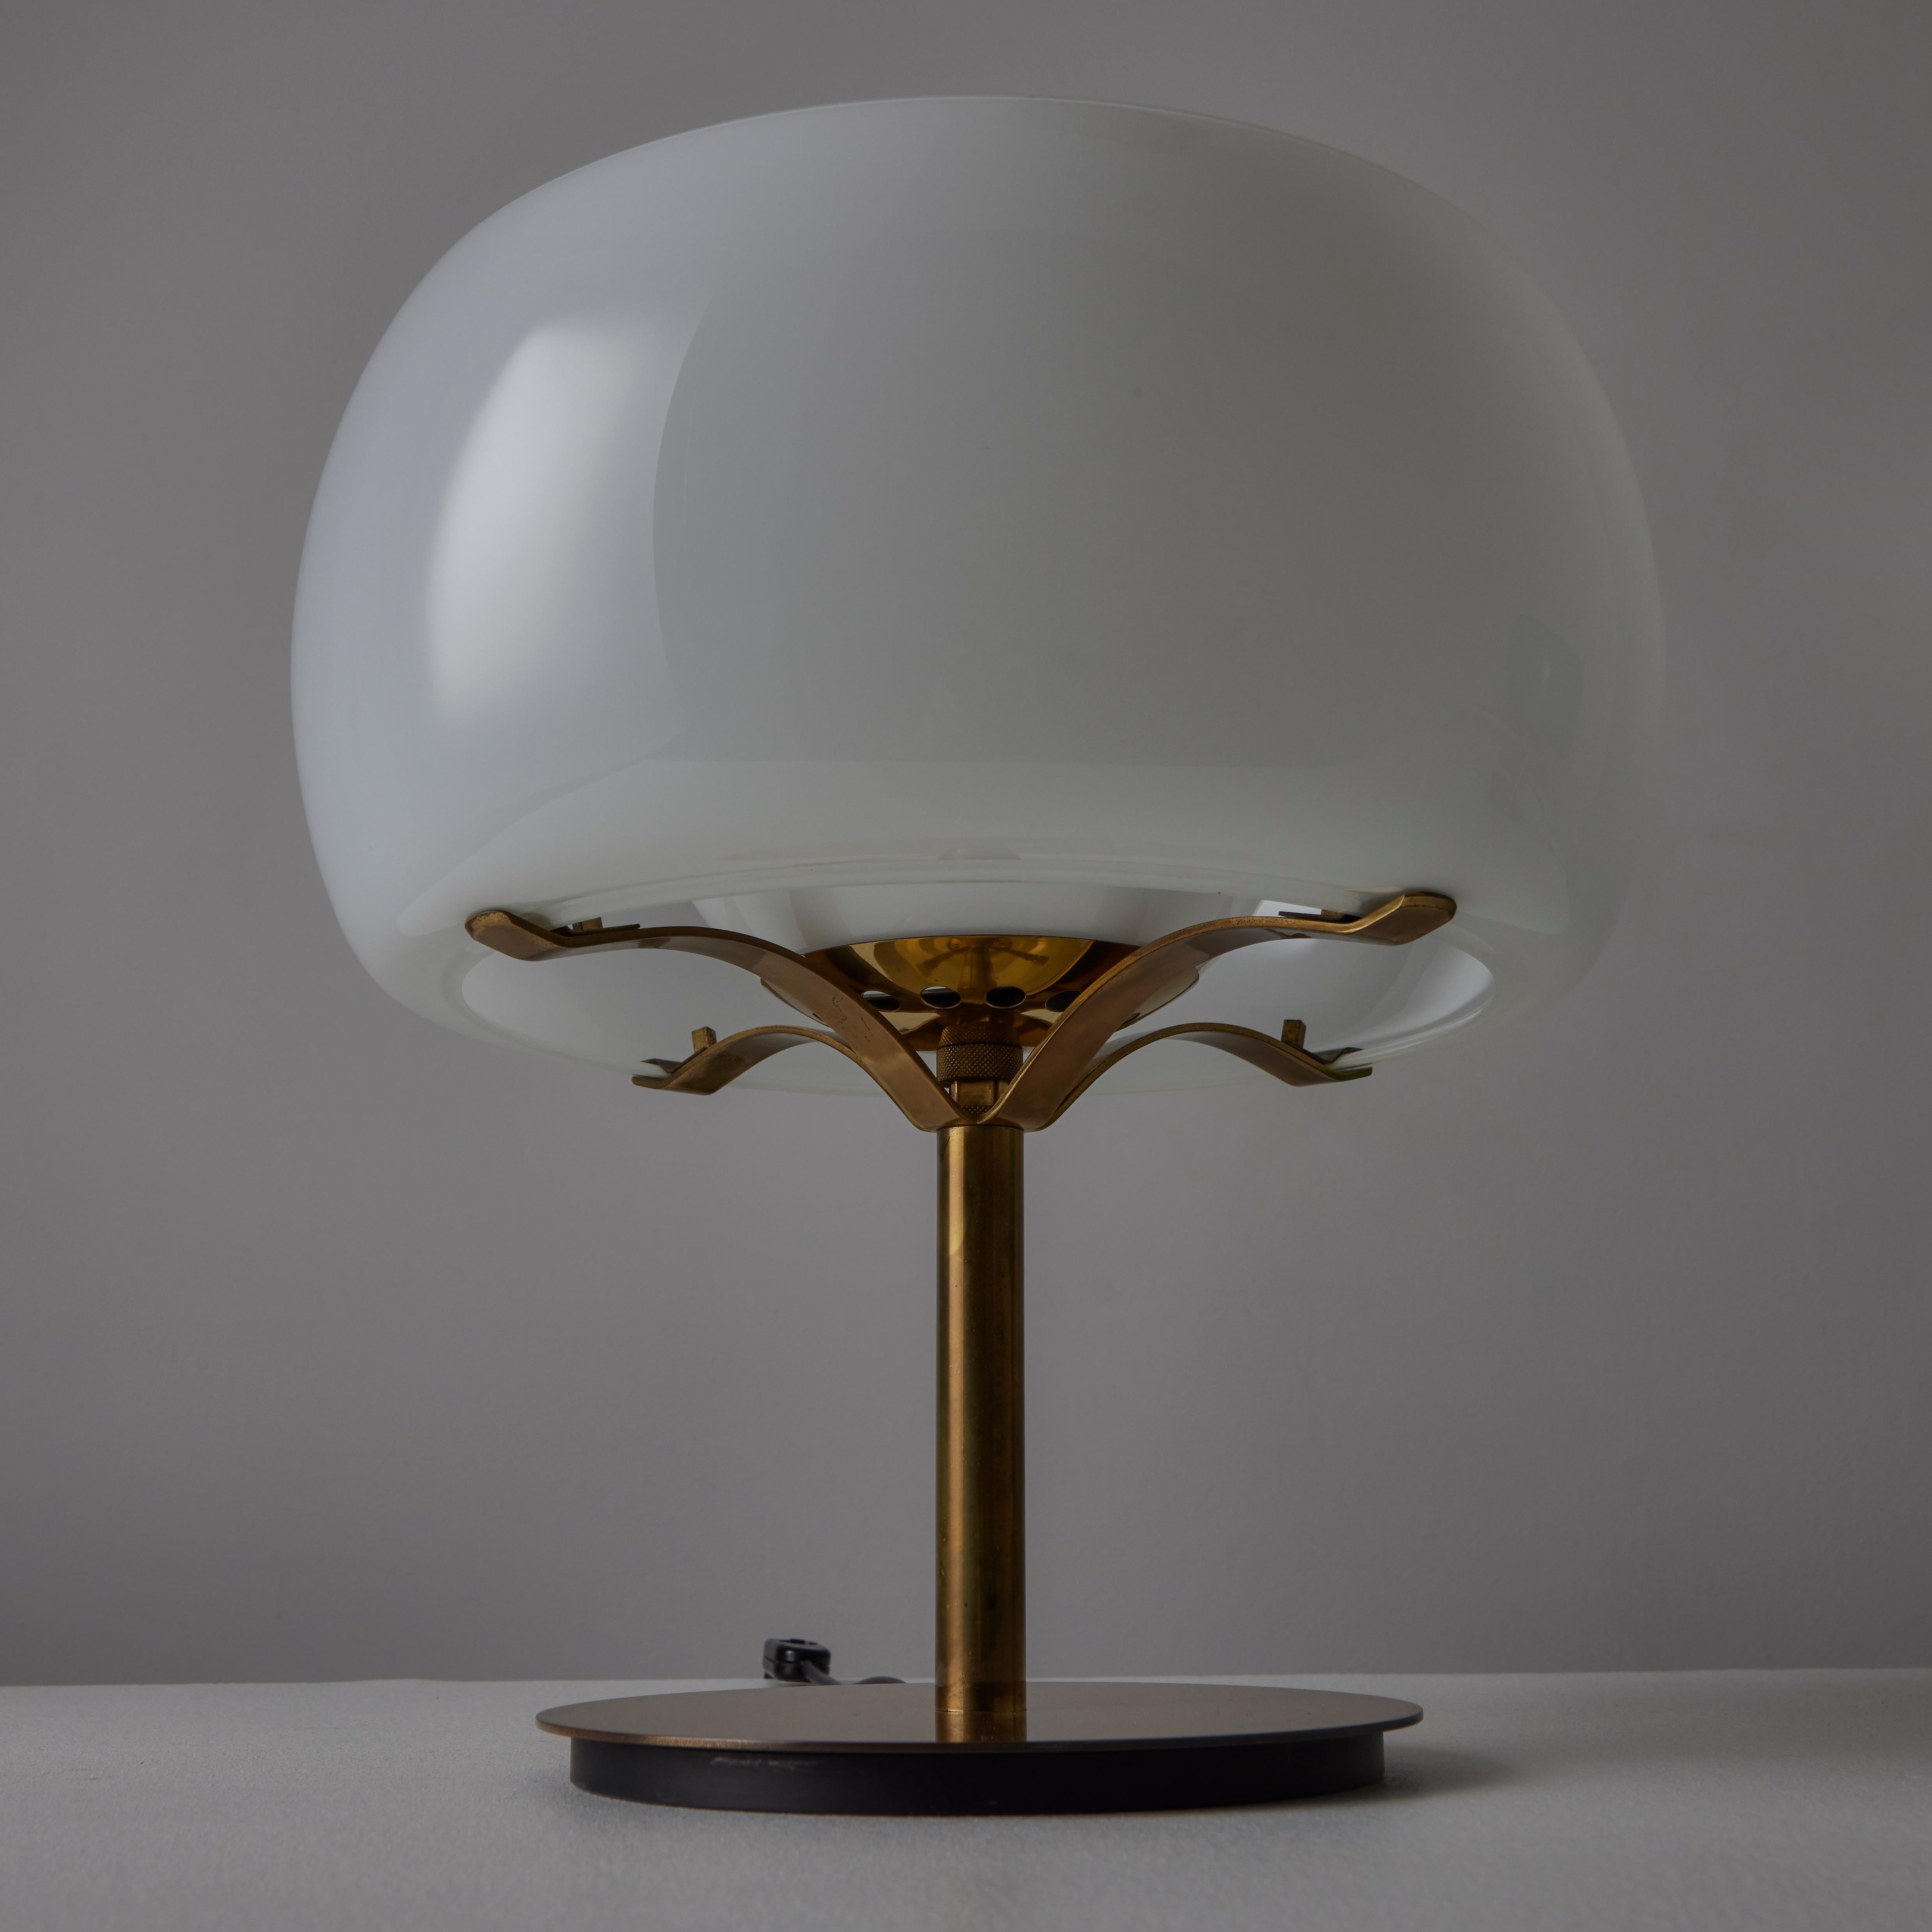 Italian Pair of 'Erse' Table Lamps by Vico Magistretti for Artemide